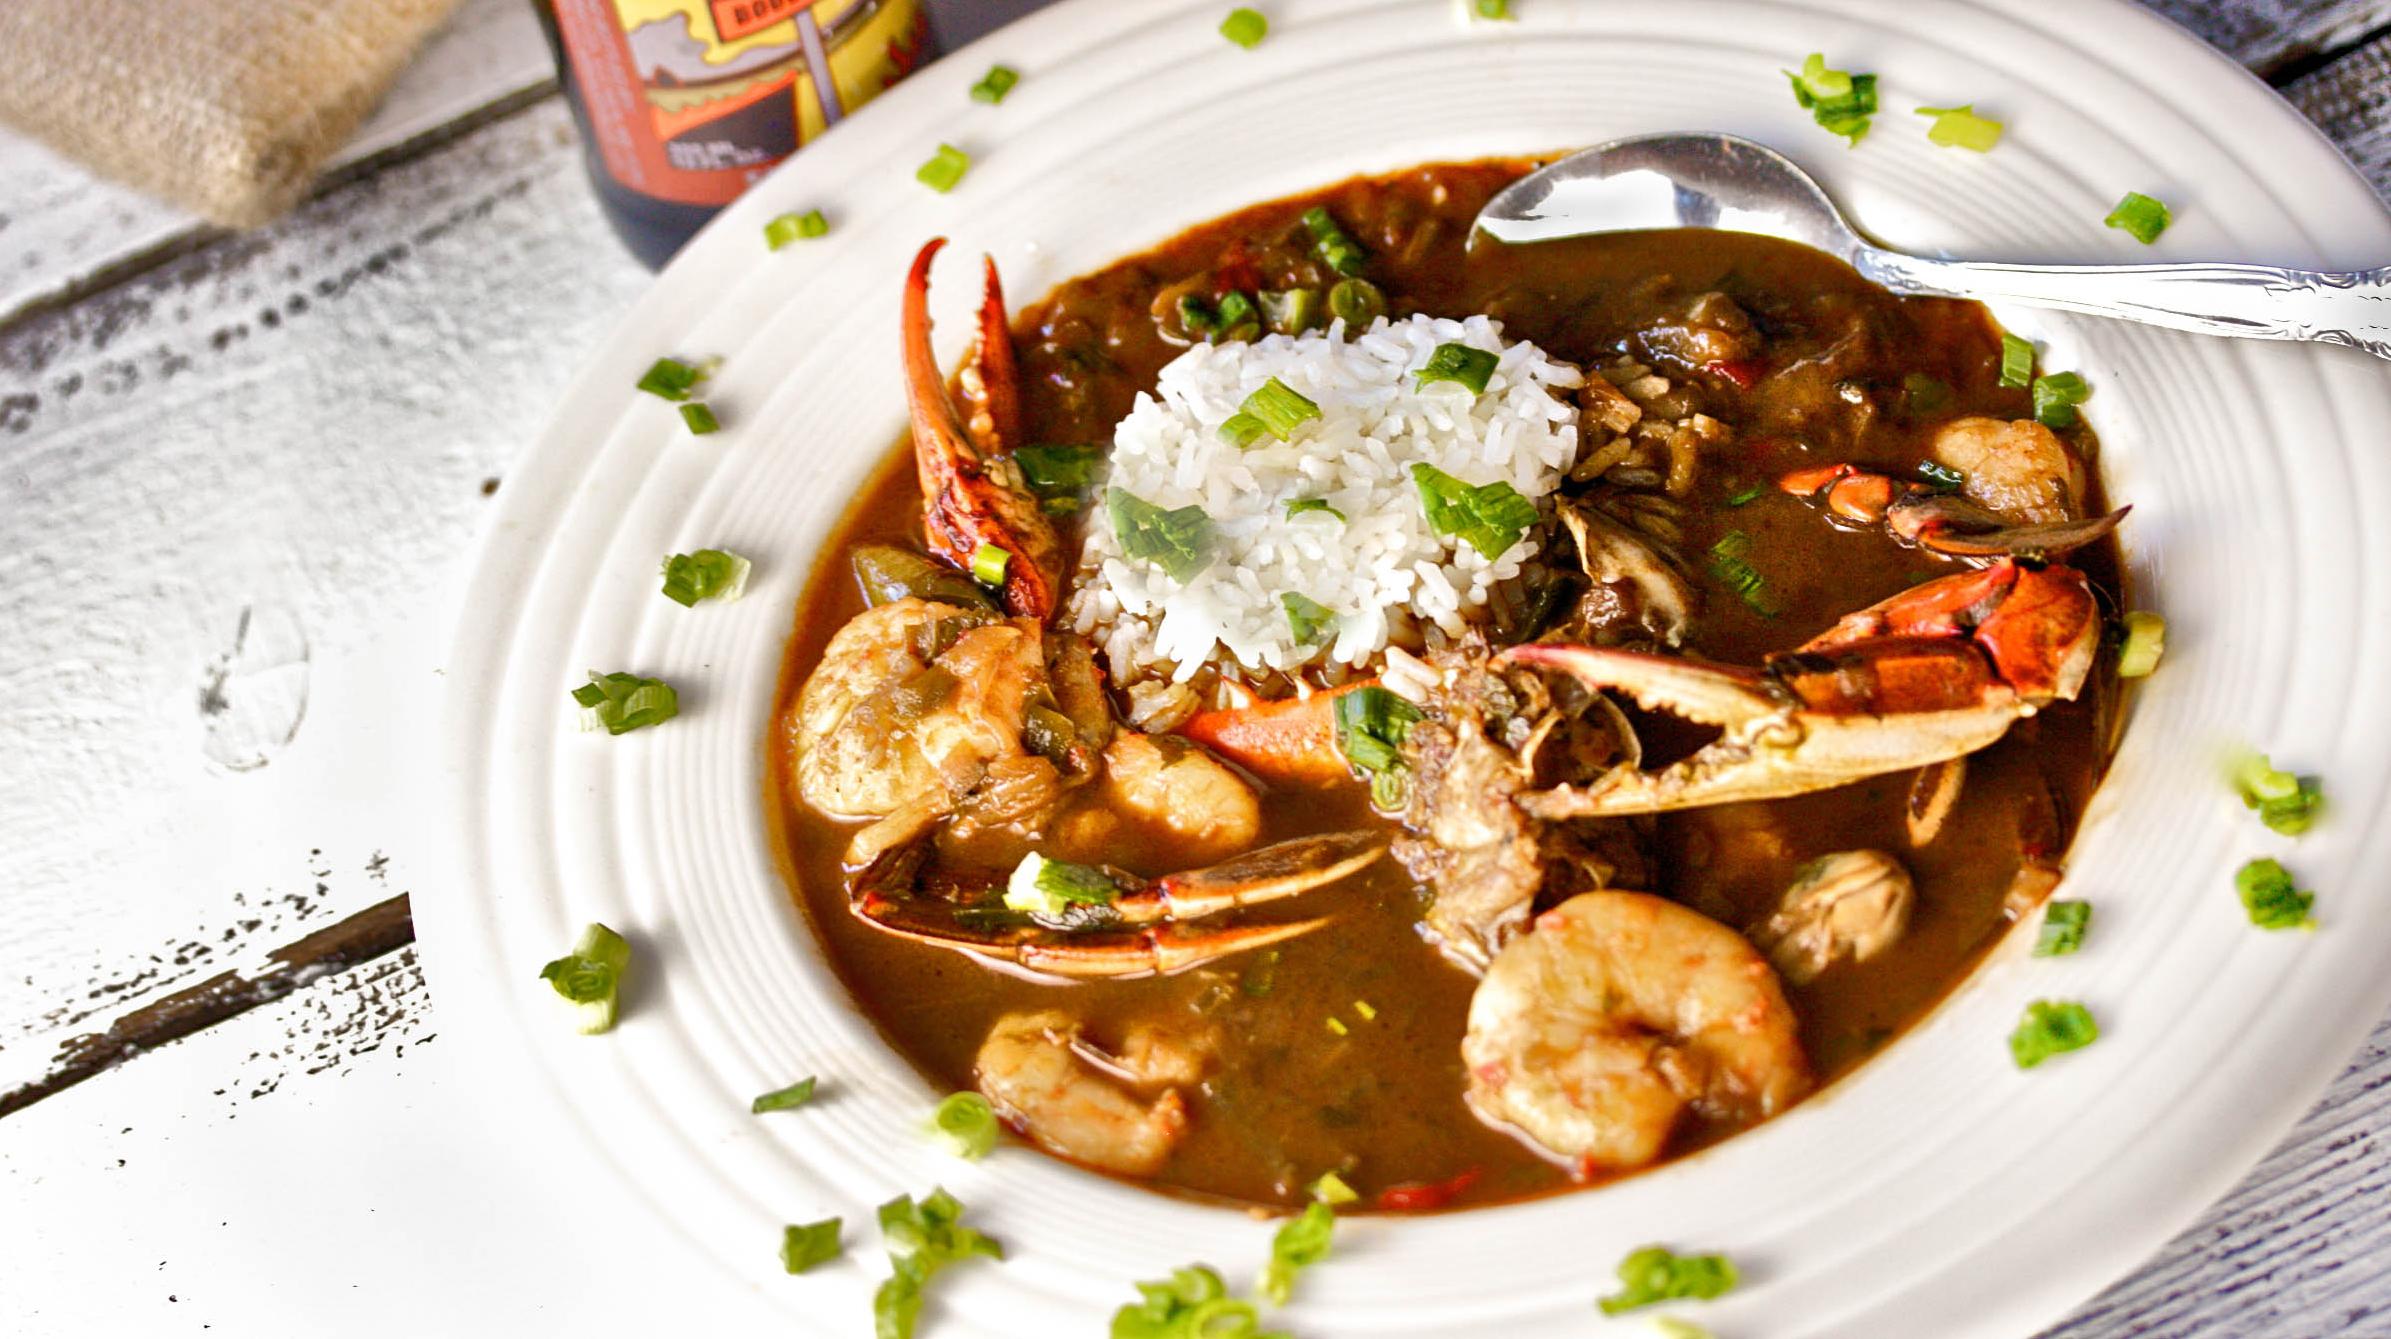  A big pot of steamy seafood gumbo, a Southern signature dish